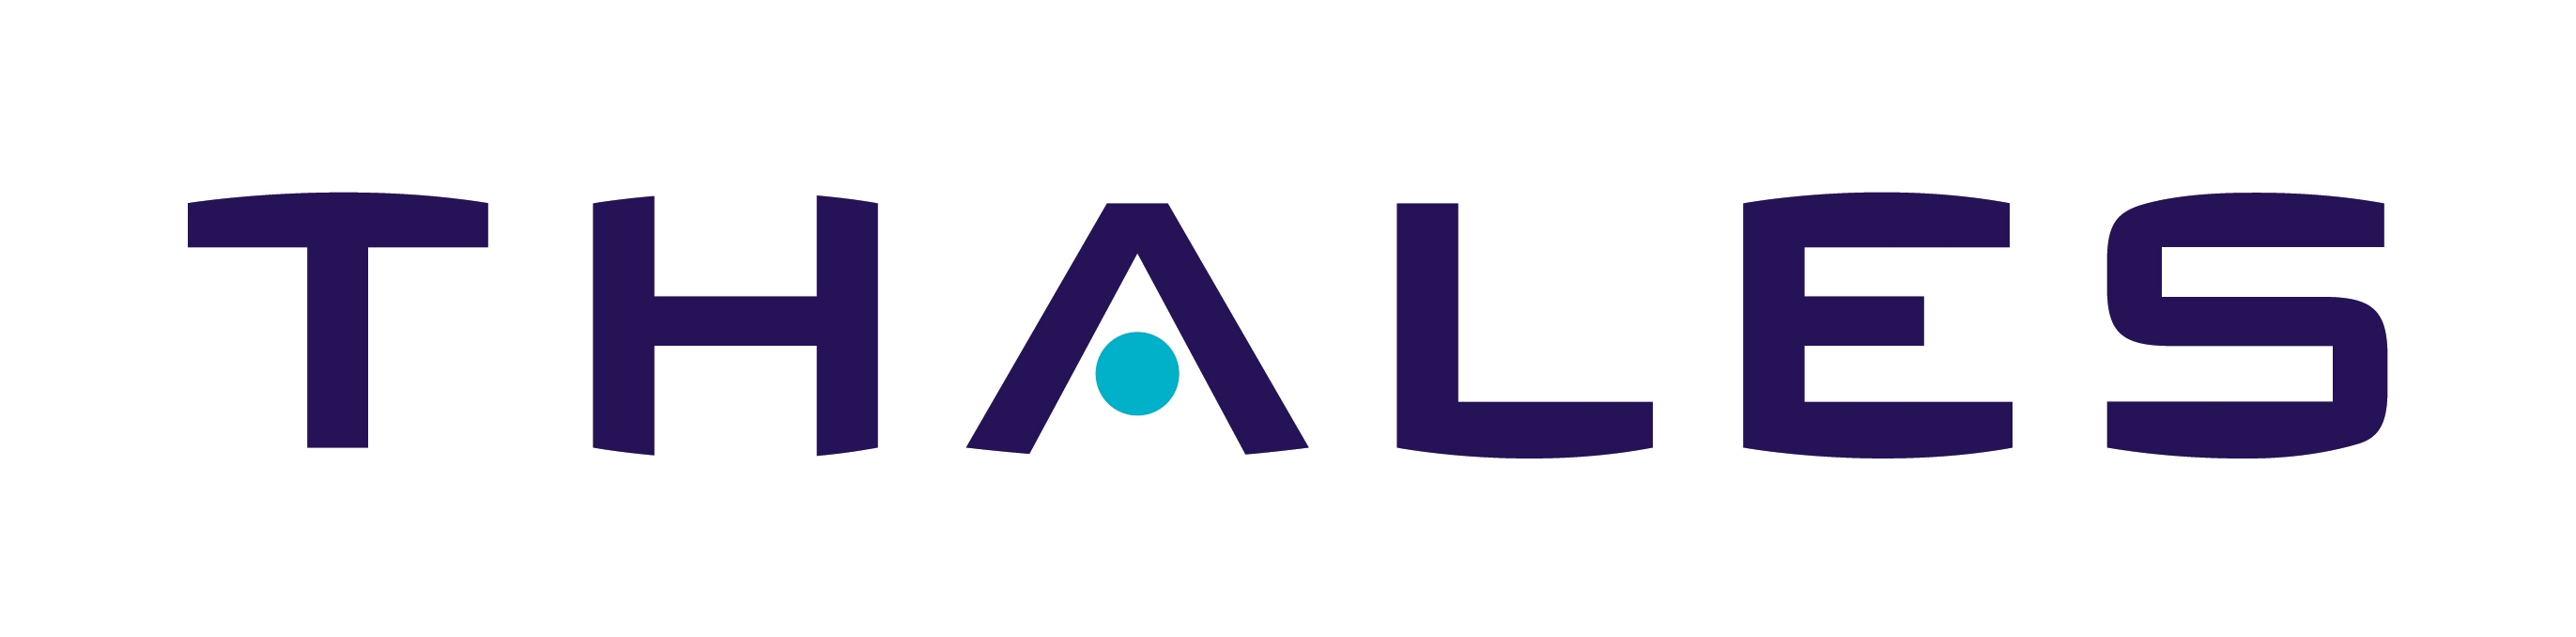 Groupe Thales